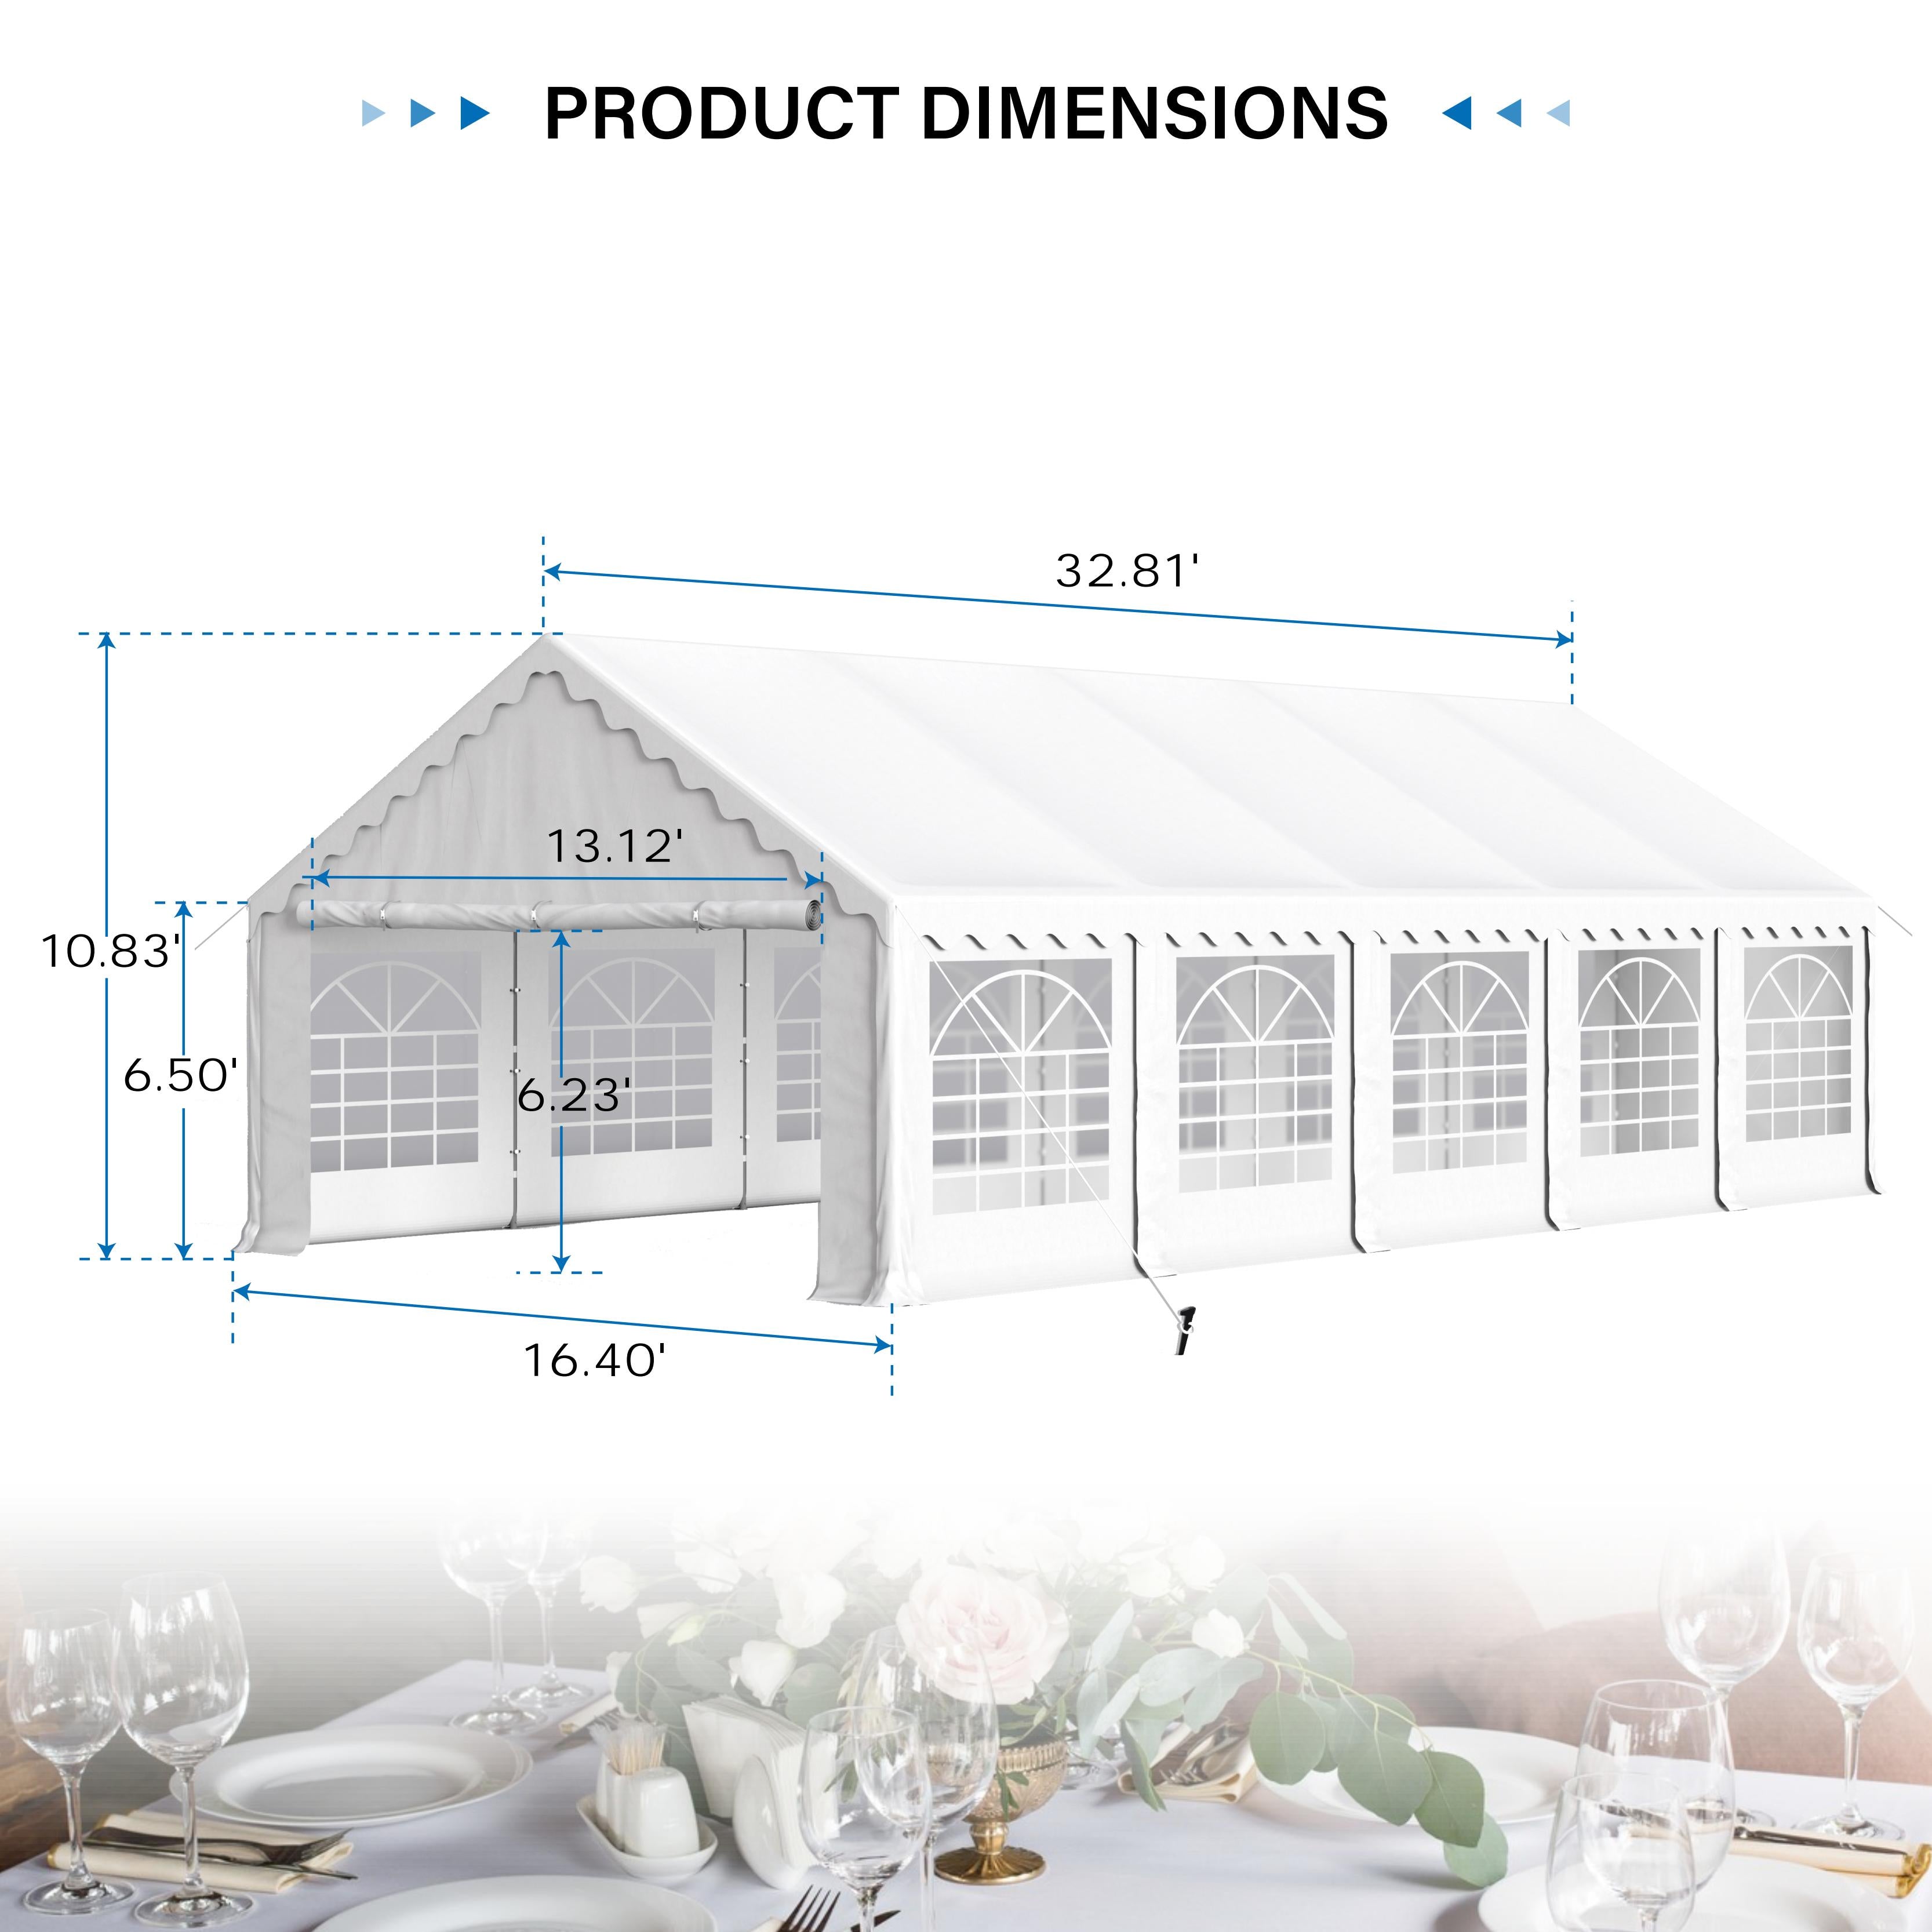 PHI VILLA 16'x32' Scalloped Valance Party Tent Canopy Shelter with Heavy Duty Design (Includes Carry Bag)